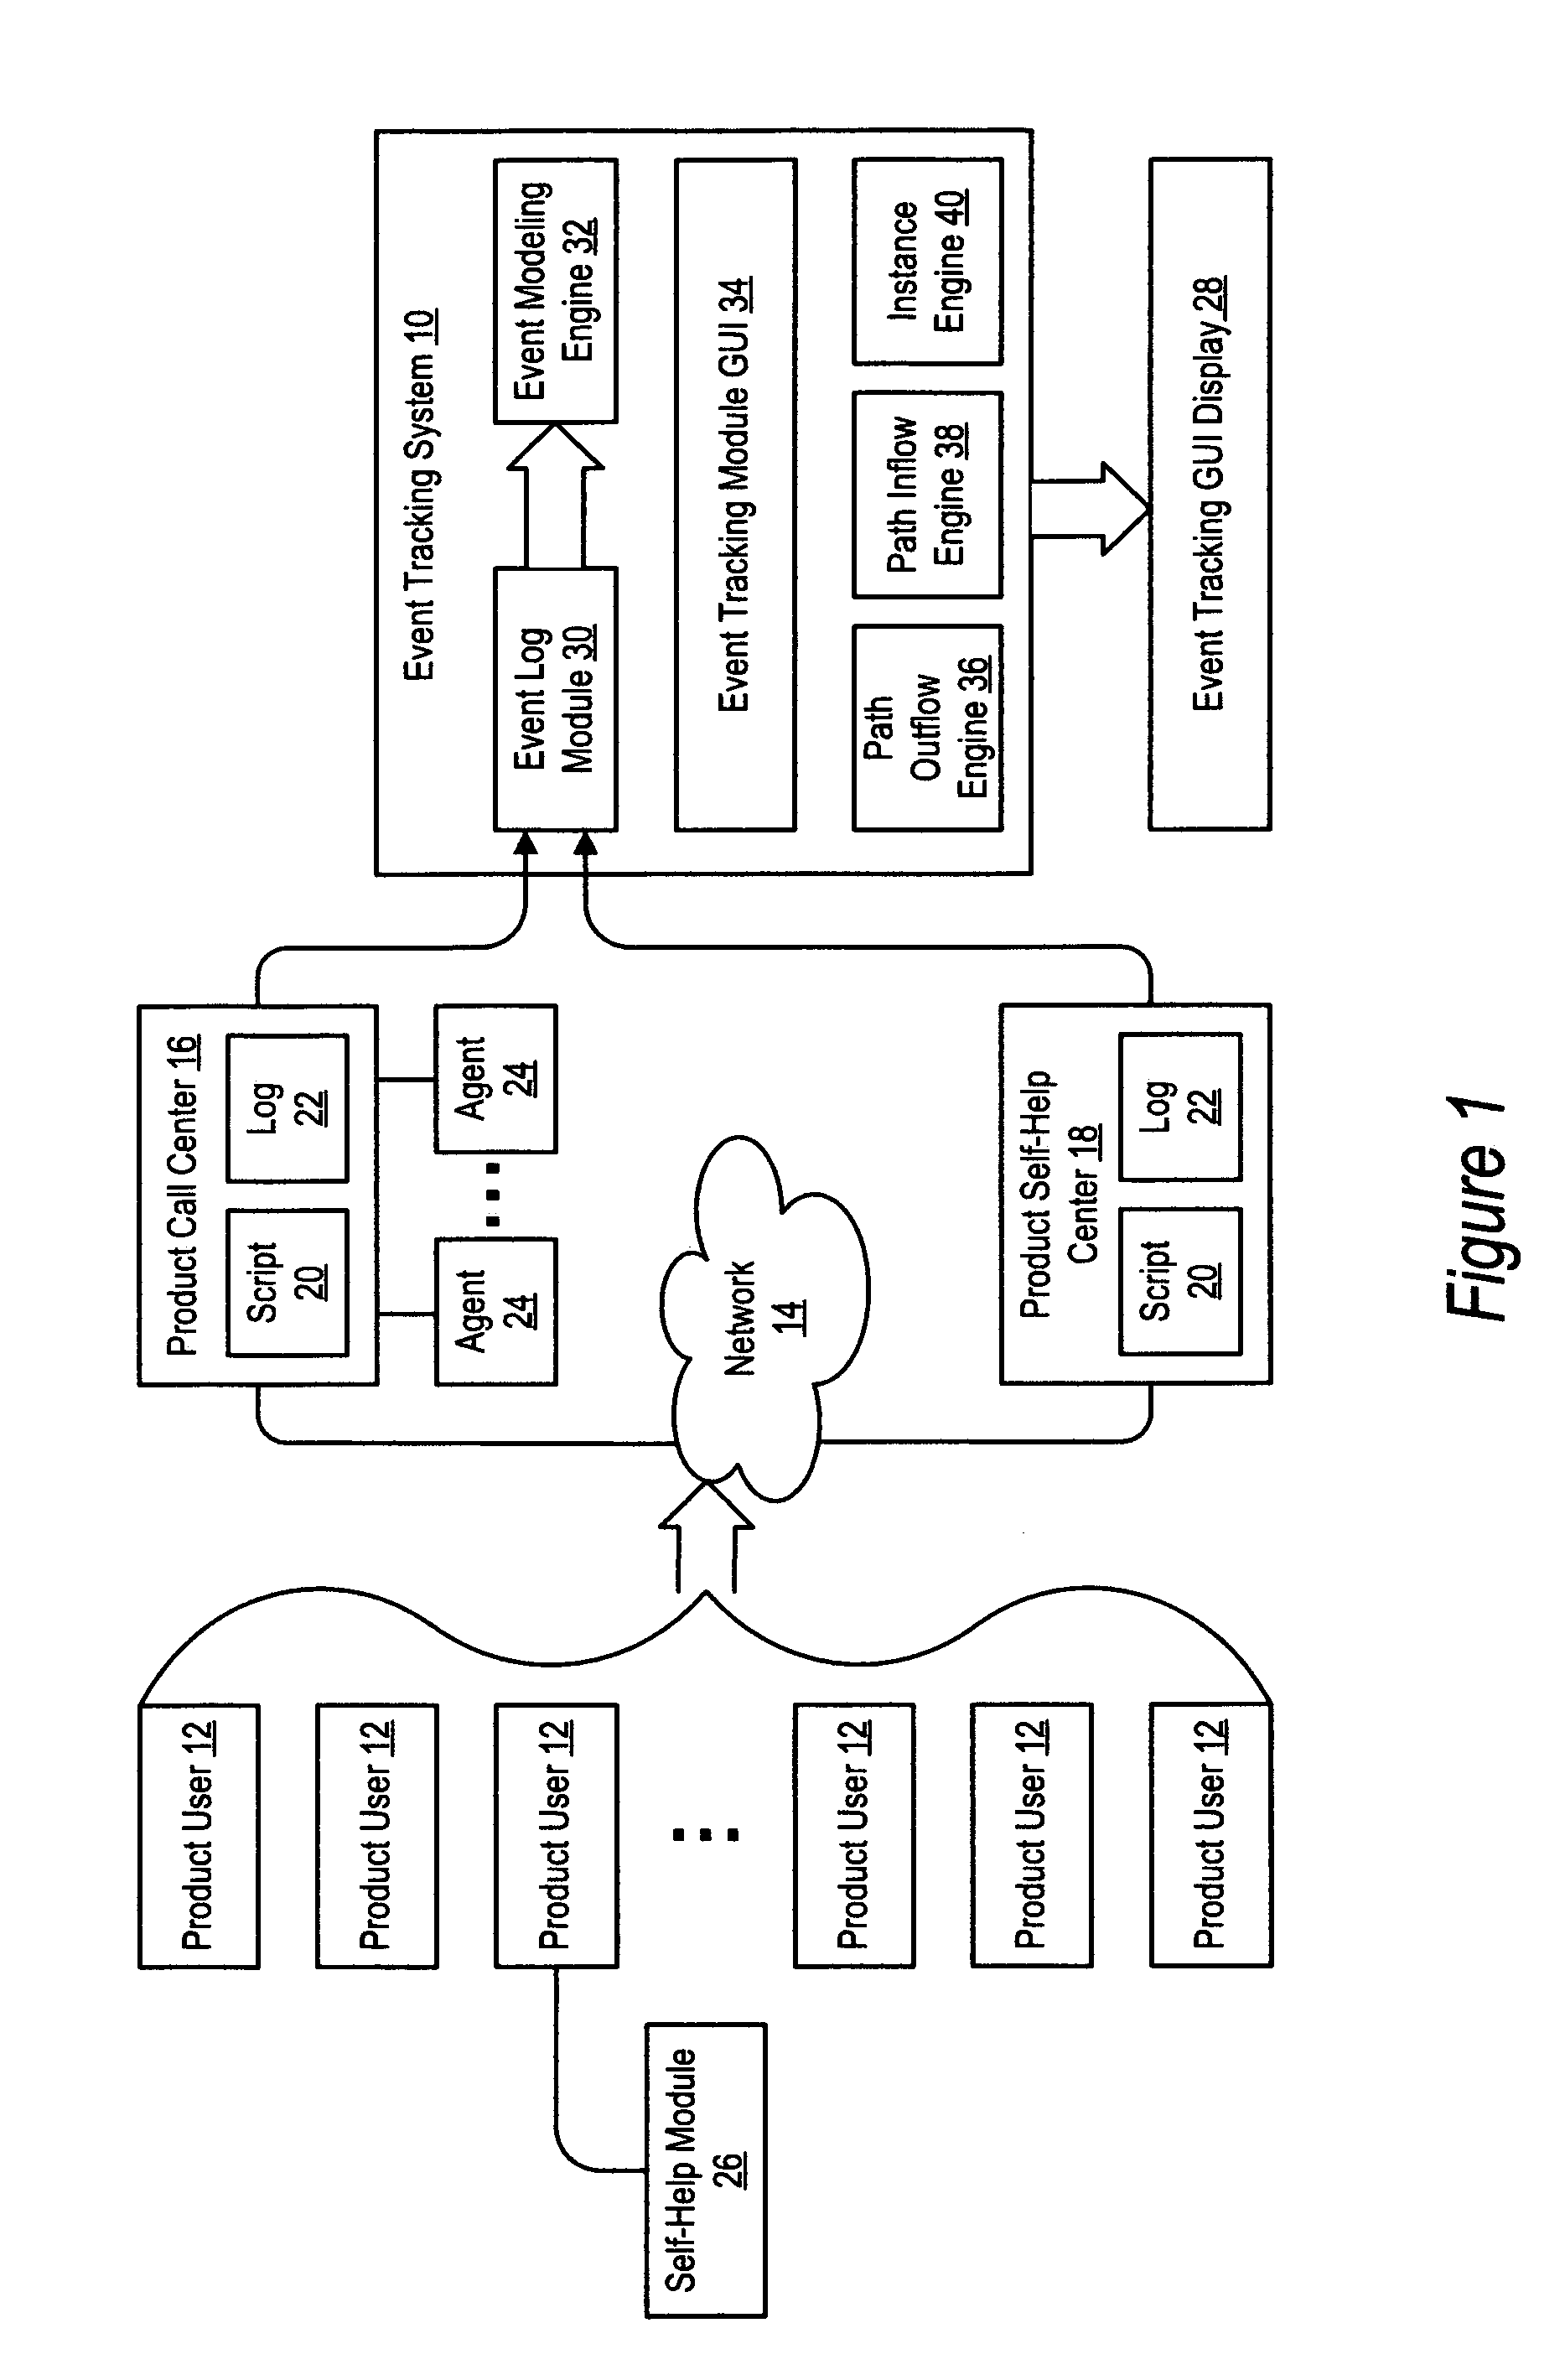 System and method for event tracking across plural contact mediums